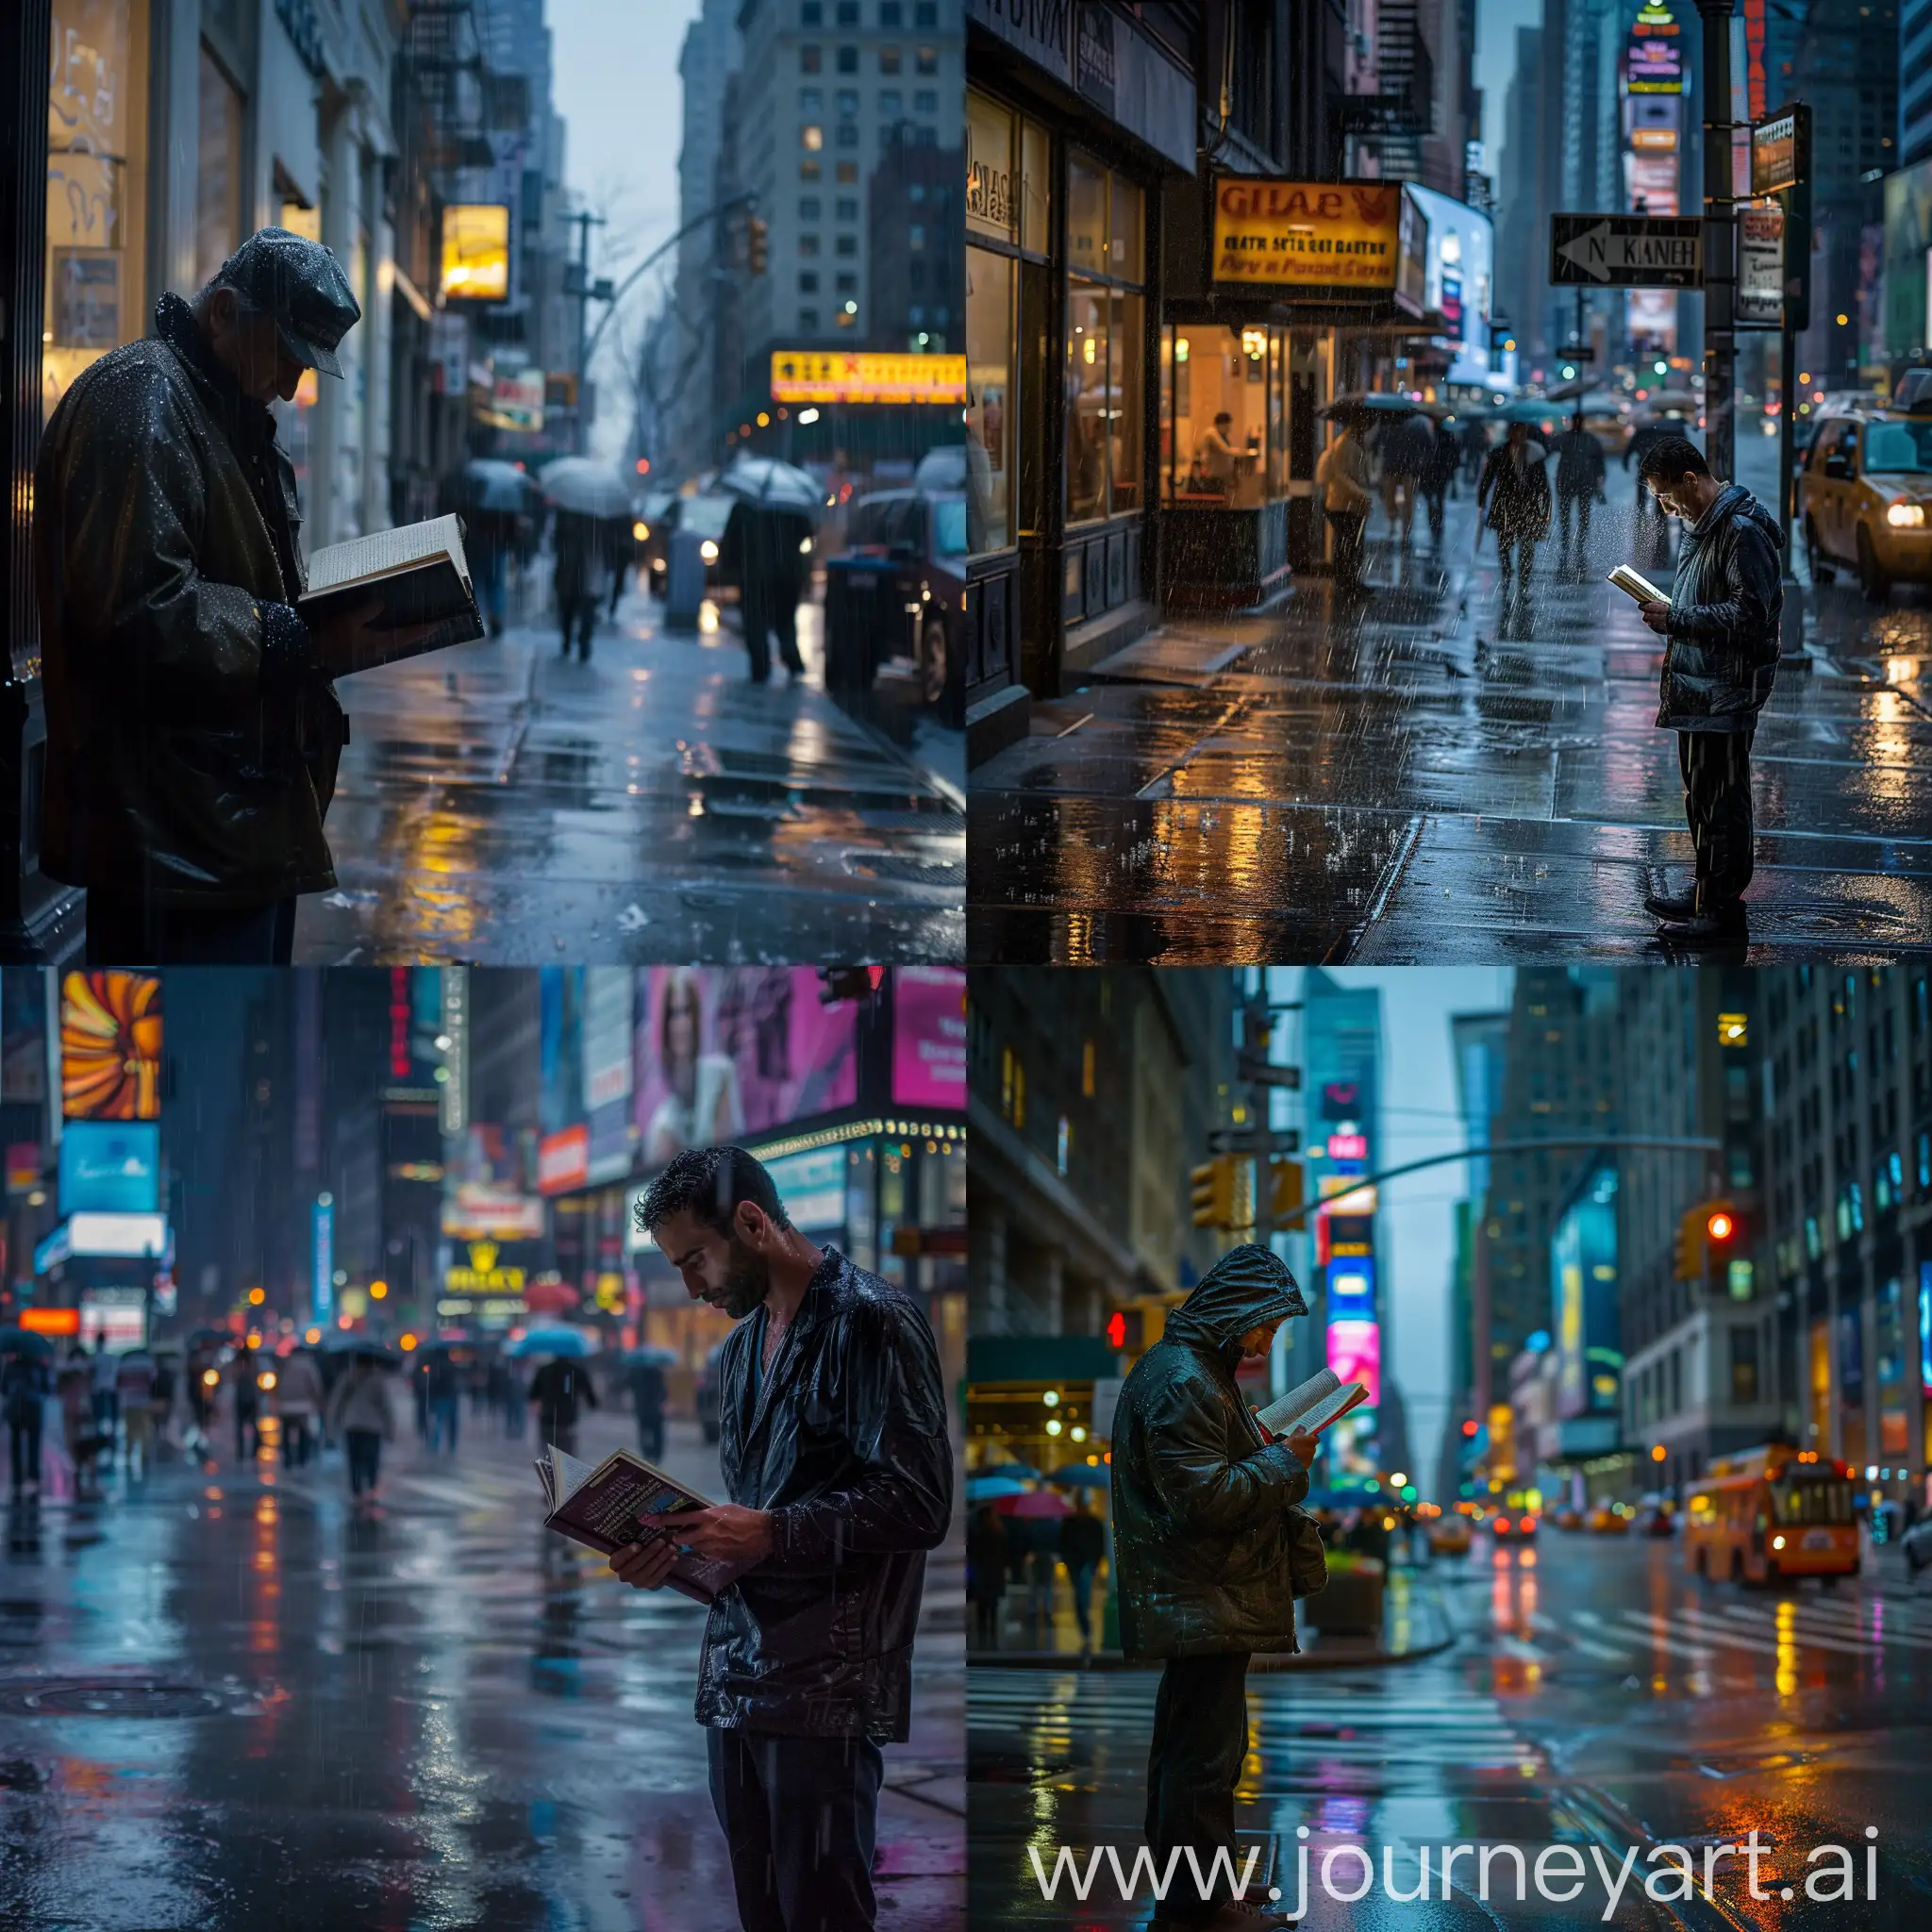 A man reading a book in the rain on the streets of Nyu York